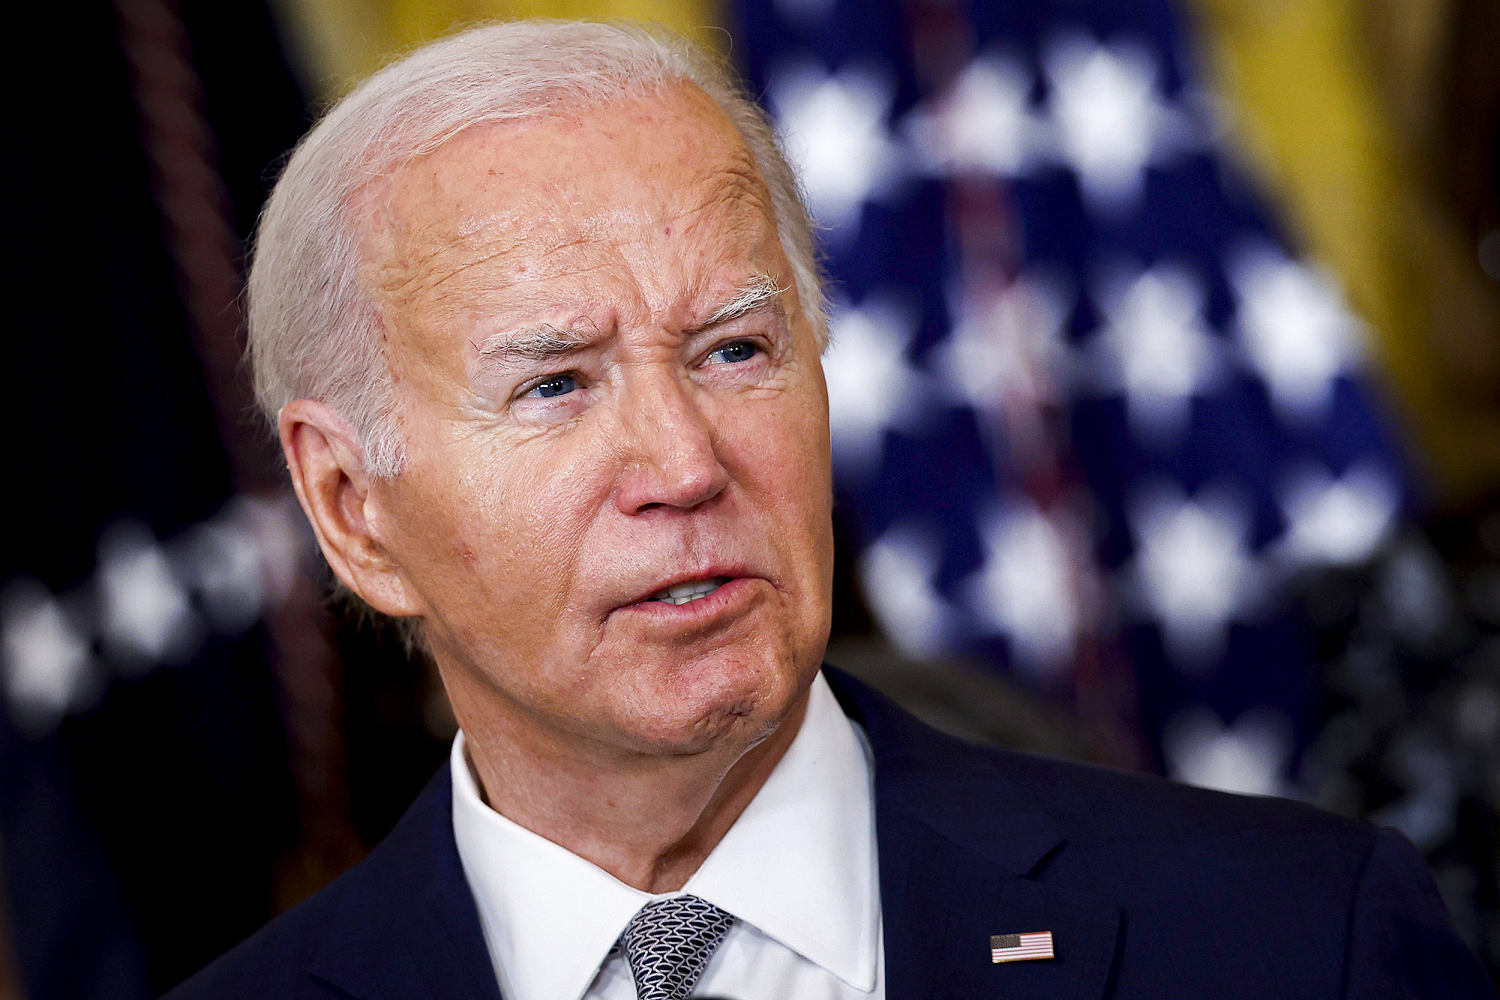 Biden campaign tells donors president can recover from subpar debate performance